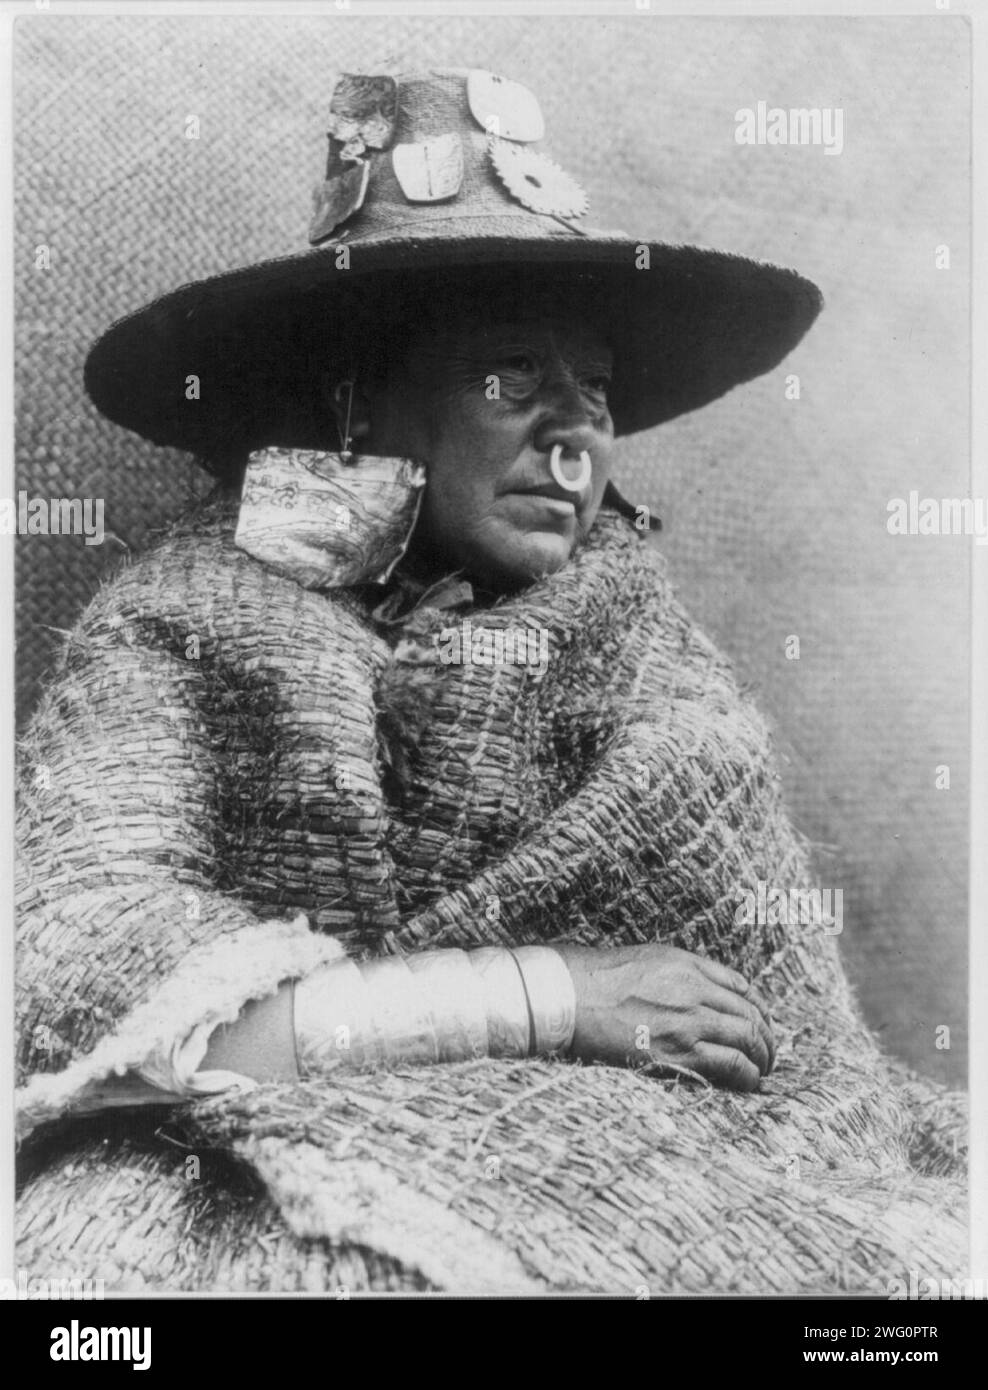 A chief's daughter-Nakoaktok, c1914. Nakoaktok woman, half-length portrait, facing right, seated, wearing a blanket, a hat with shell ornaments, large earrings, a nose ring, and several bracelets. Stock Photo